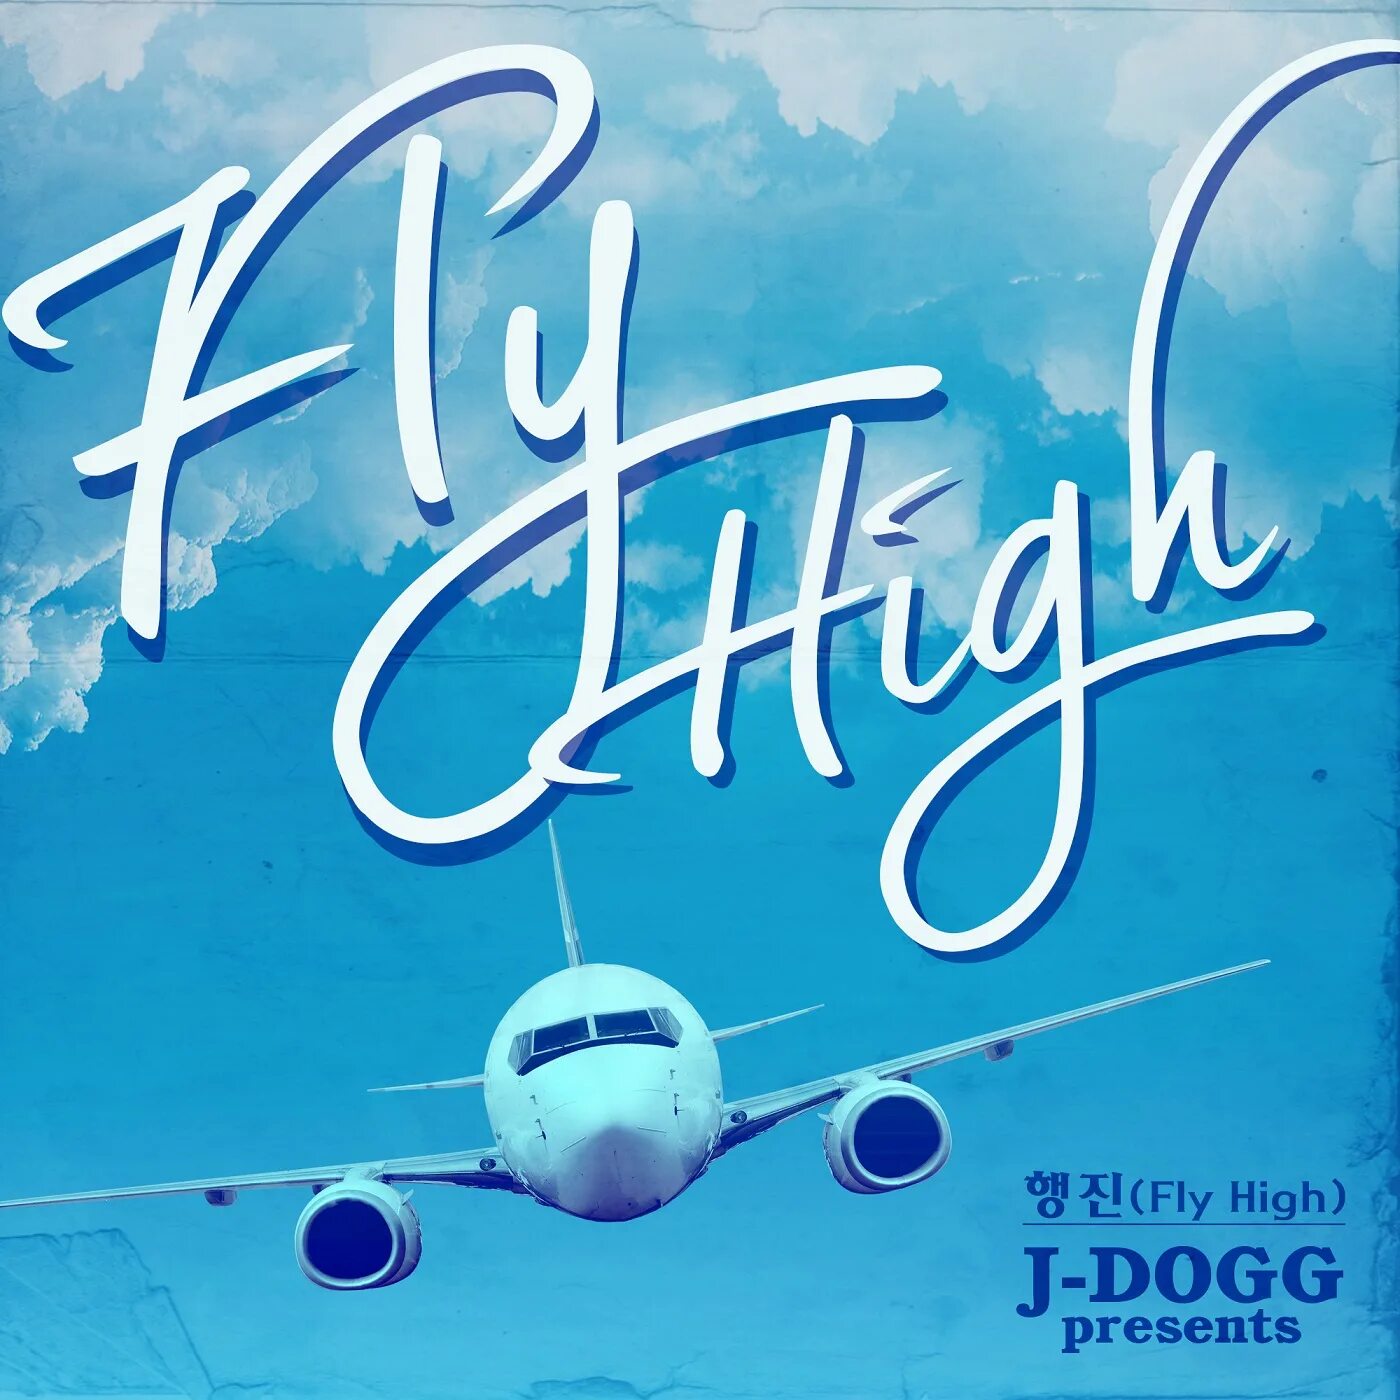 Flying higher and higher. Fly High. Fly High activity book. Fly High 1. Fly High 2.